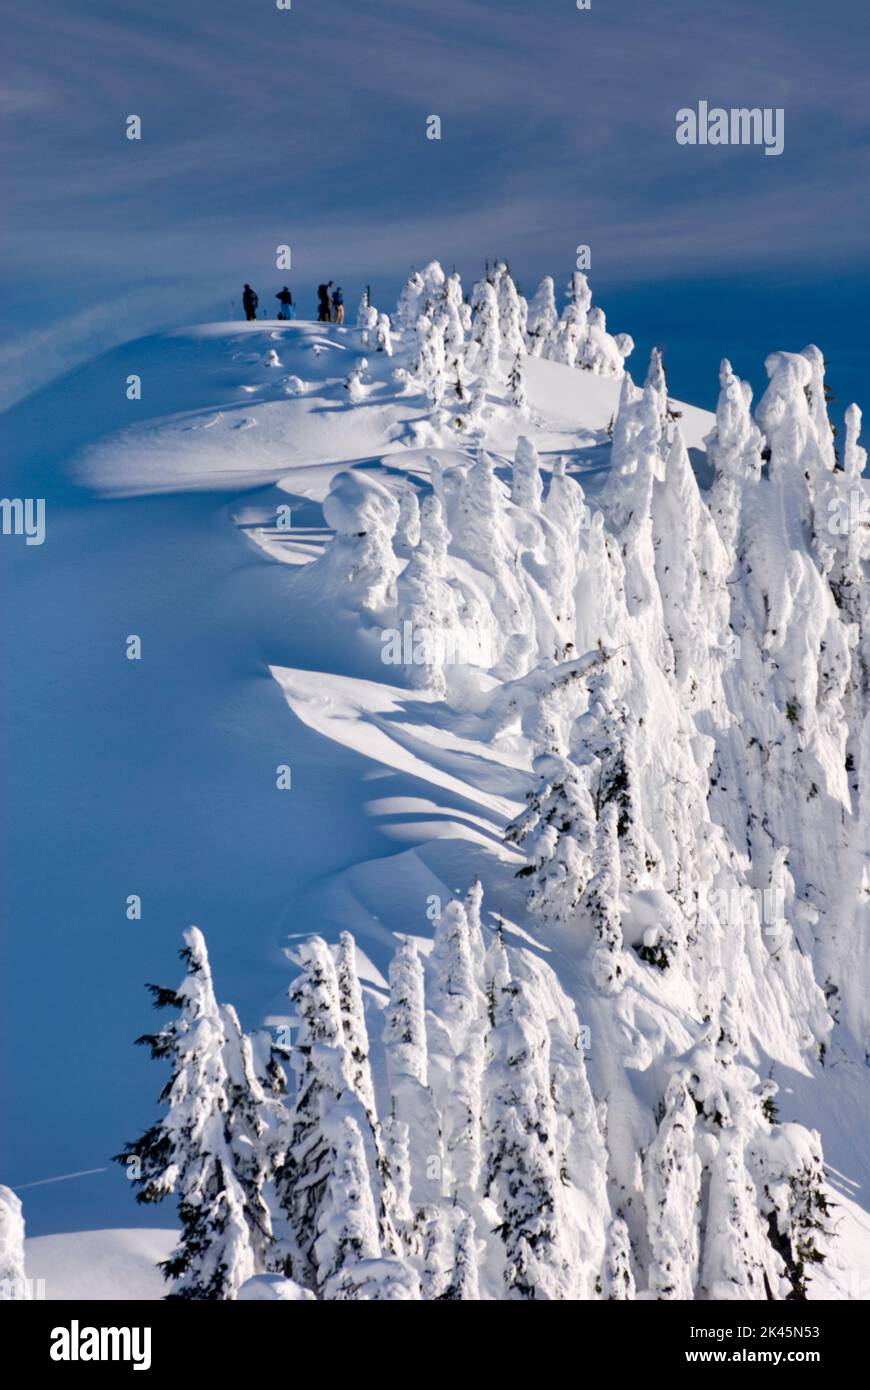 Winter snow in the Northern Cascades mountains, elevated view of sunlight on ice formations on trees., Stock Photo